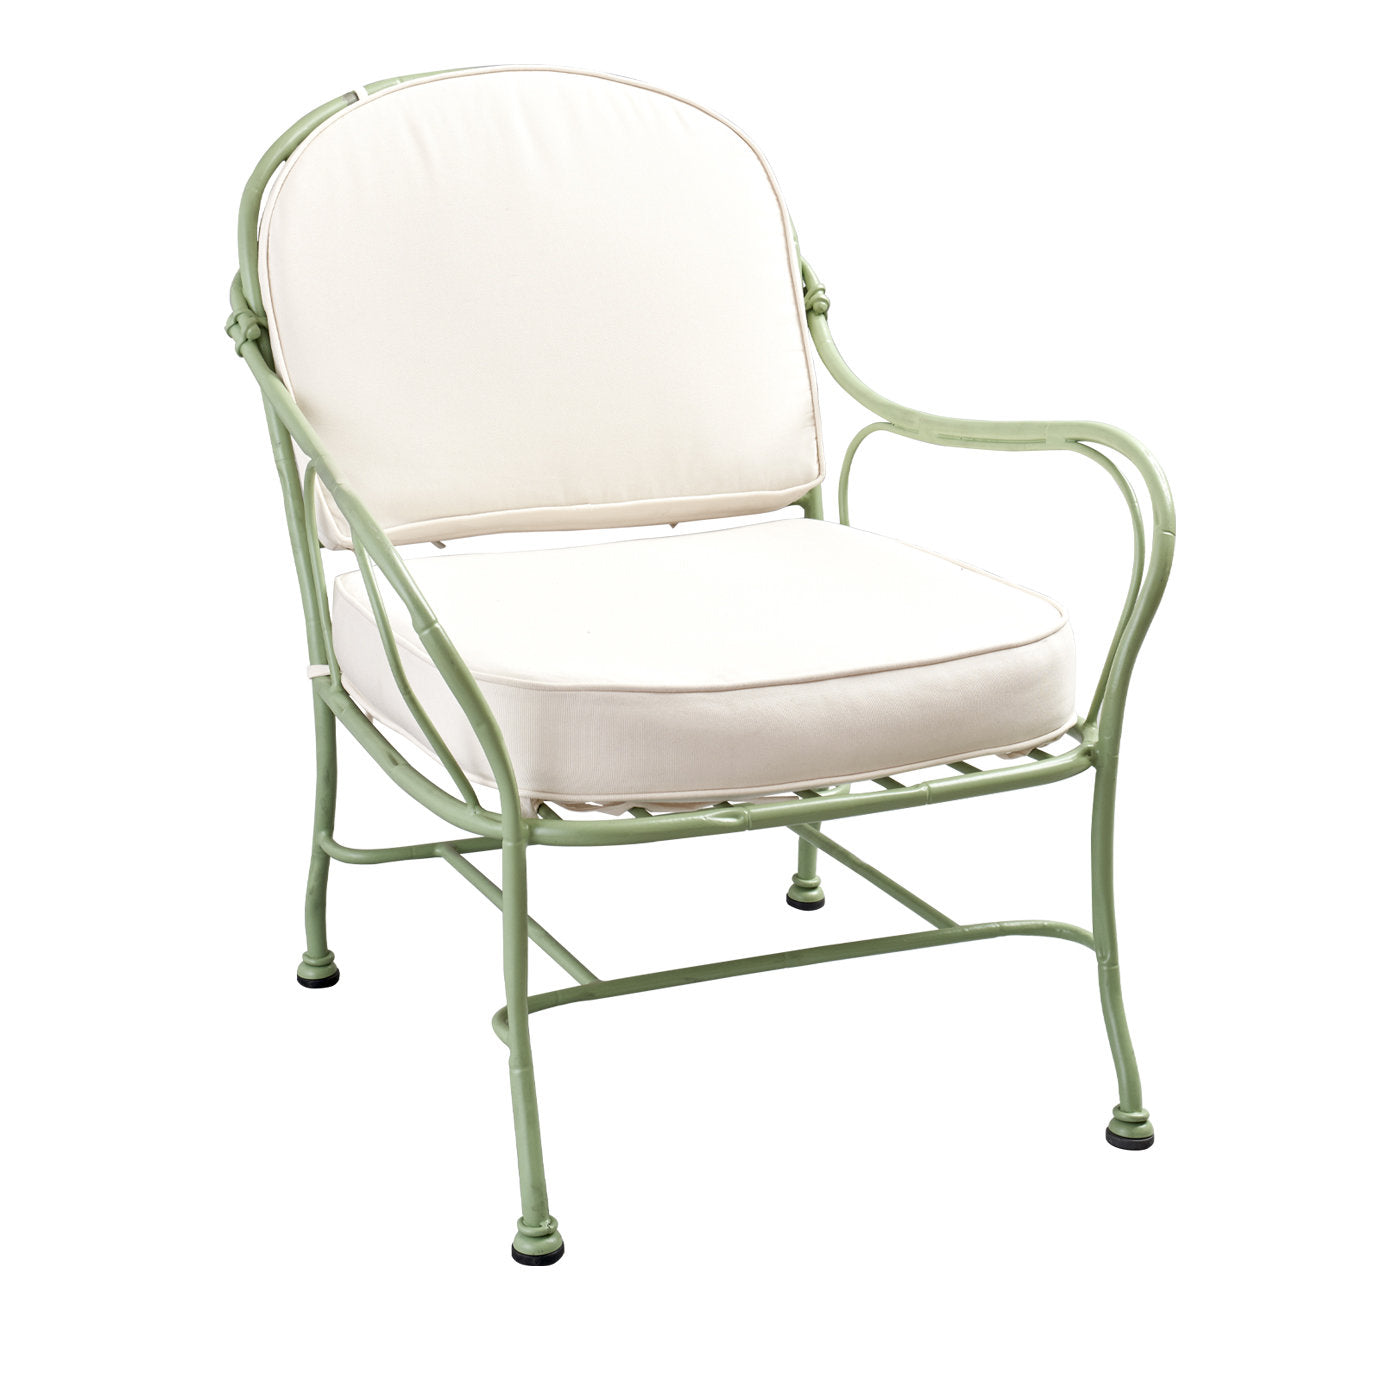 Bamboo Outdoor Armchair in Stainless Steel - Main view